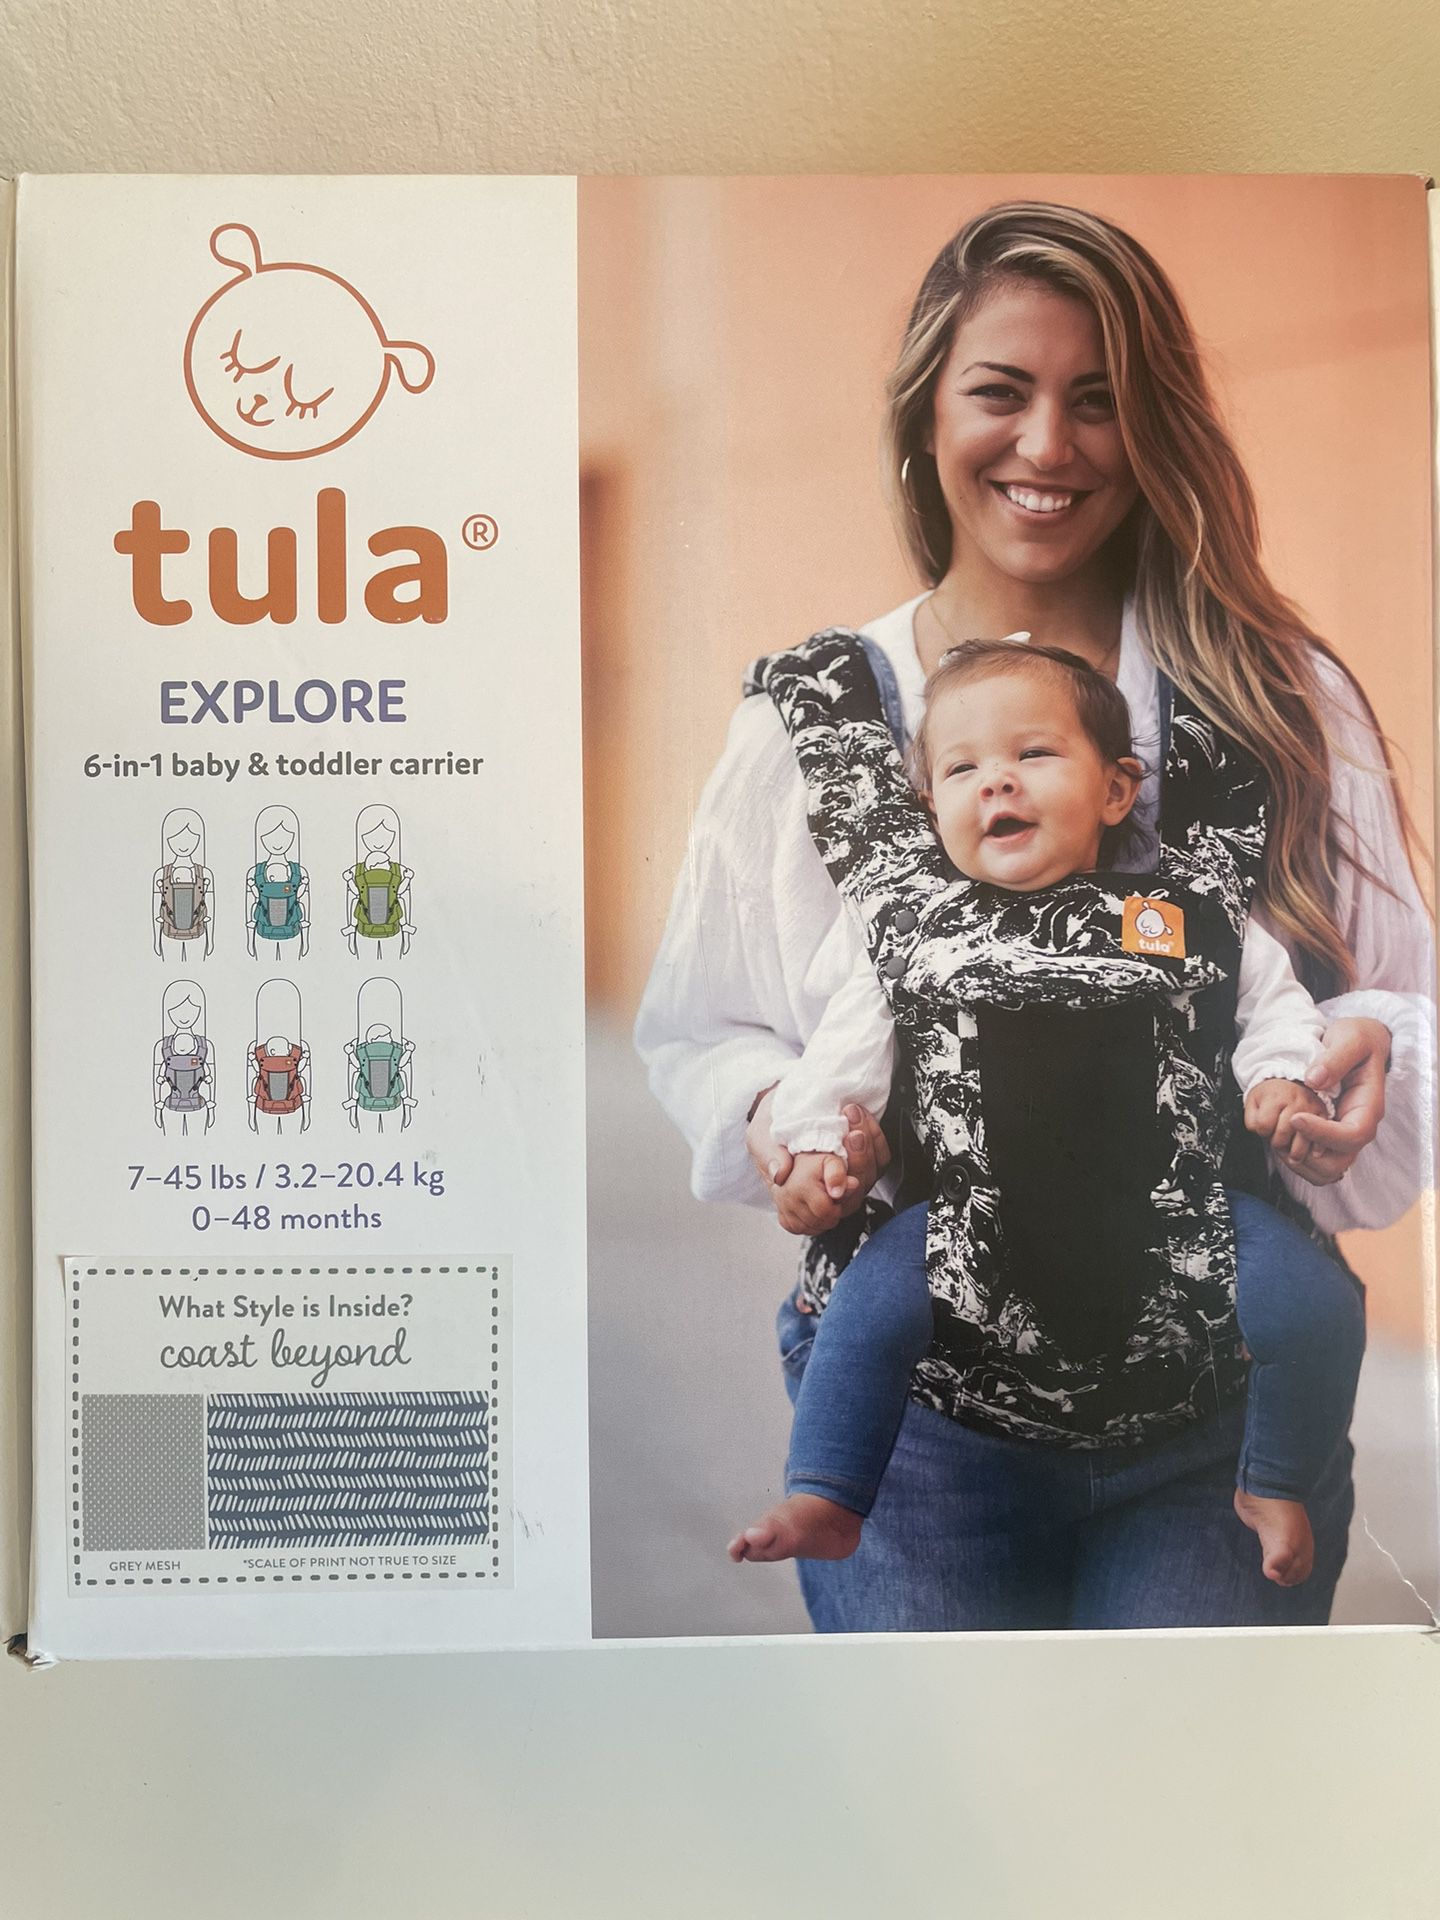 Tula baby Carrier Explore 